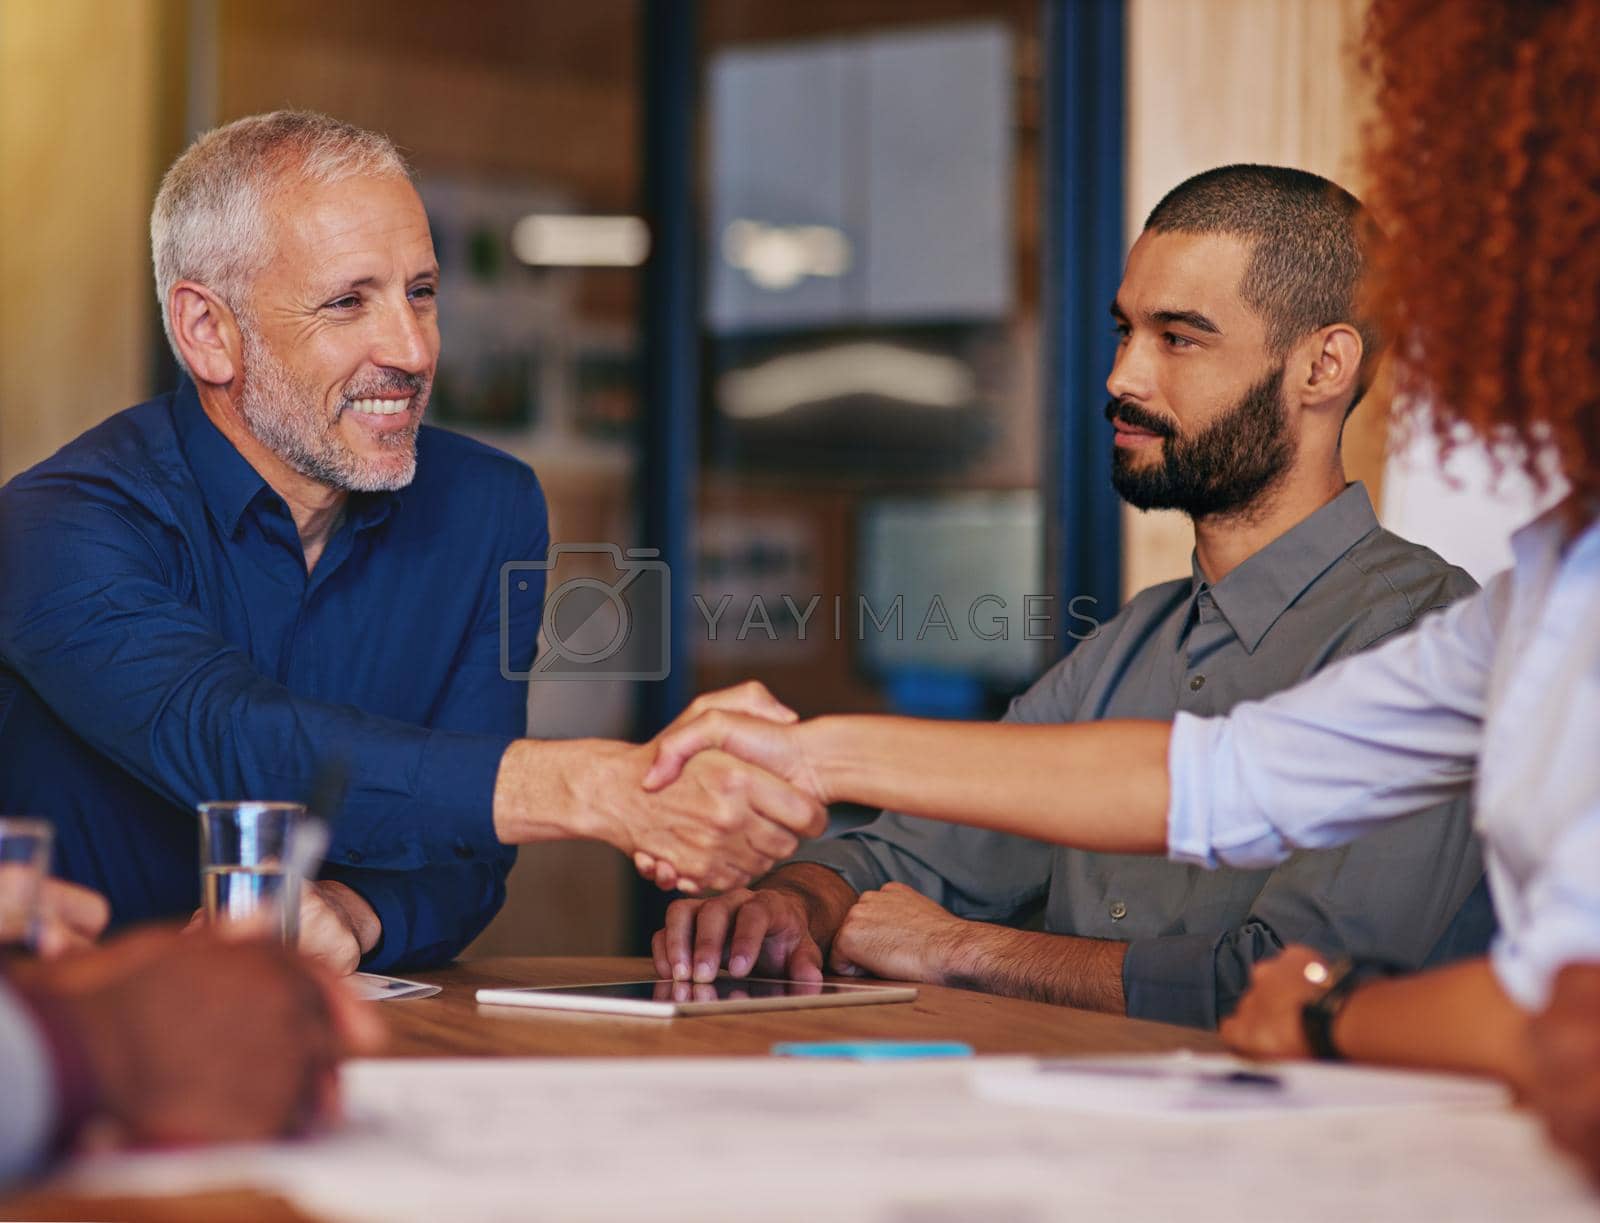 Royalty free image of Welcoming a new member to the team. colleagues shaking hands in an office meeting. by YuriArcurs